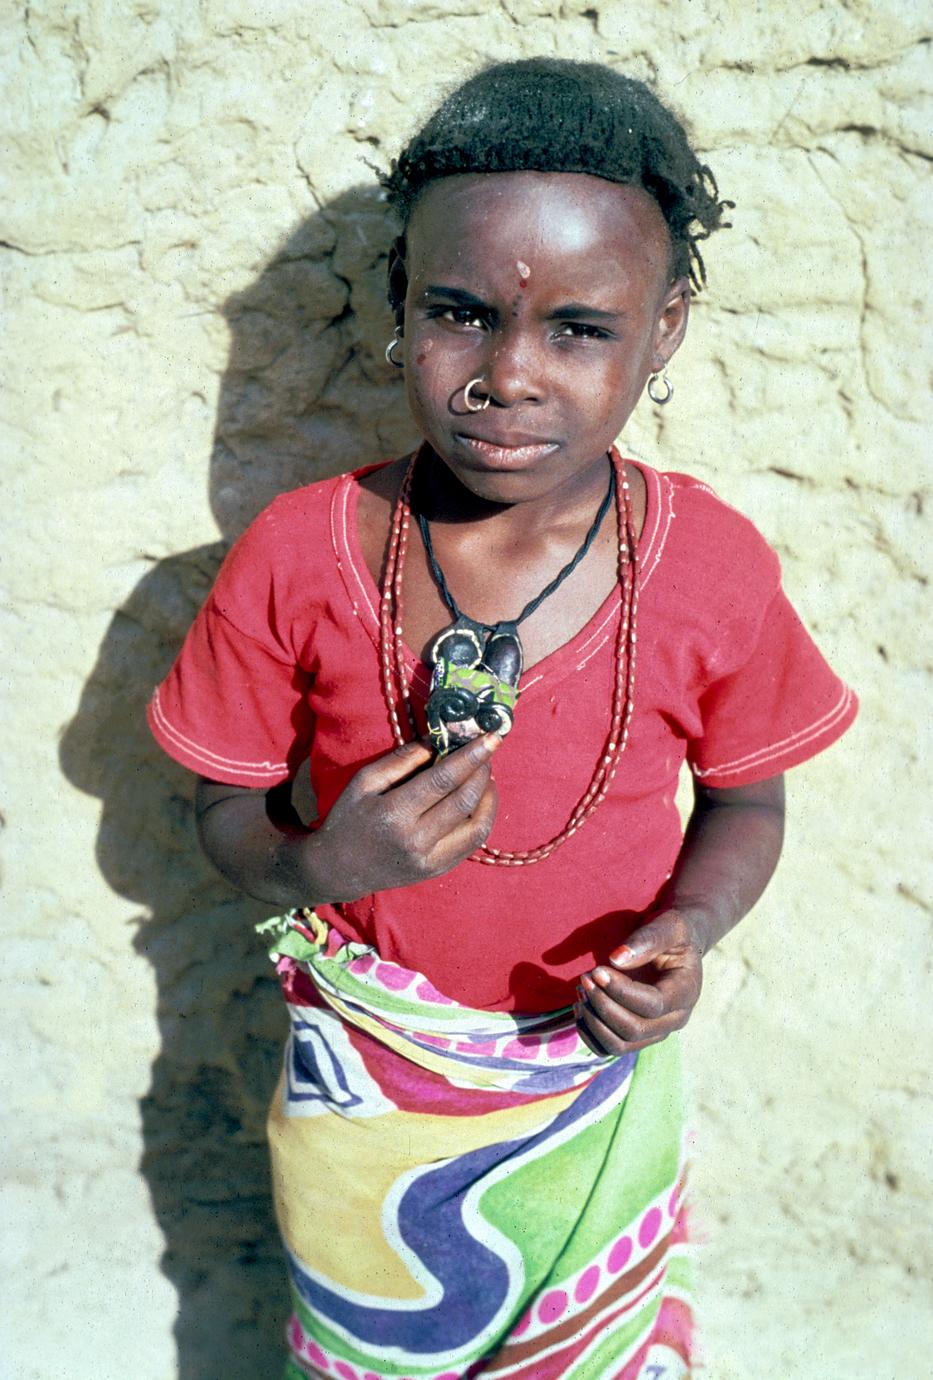 Kanuri Girl with Special Hairstyle - UWDC - UW-Madison Libraries